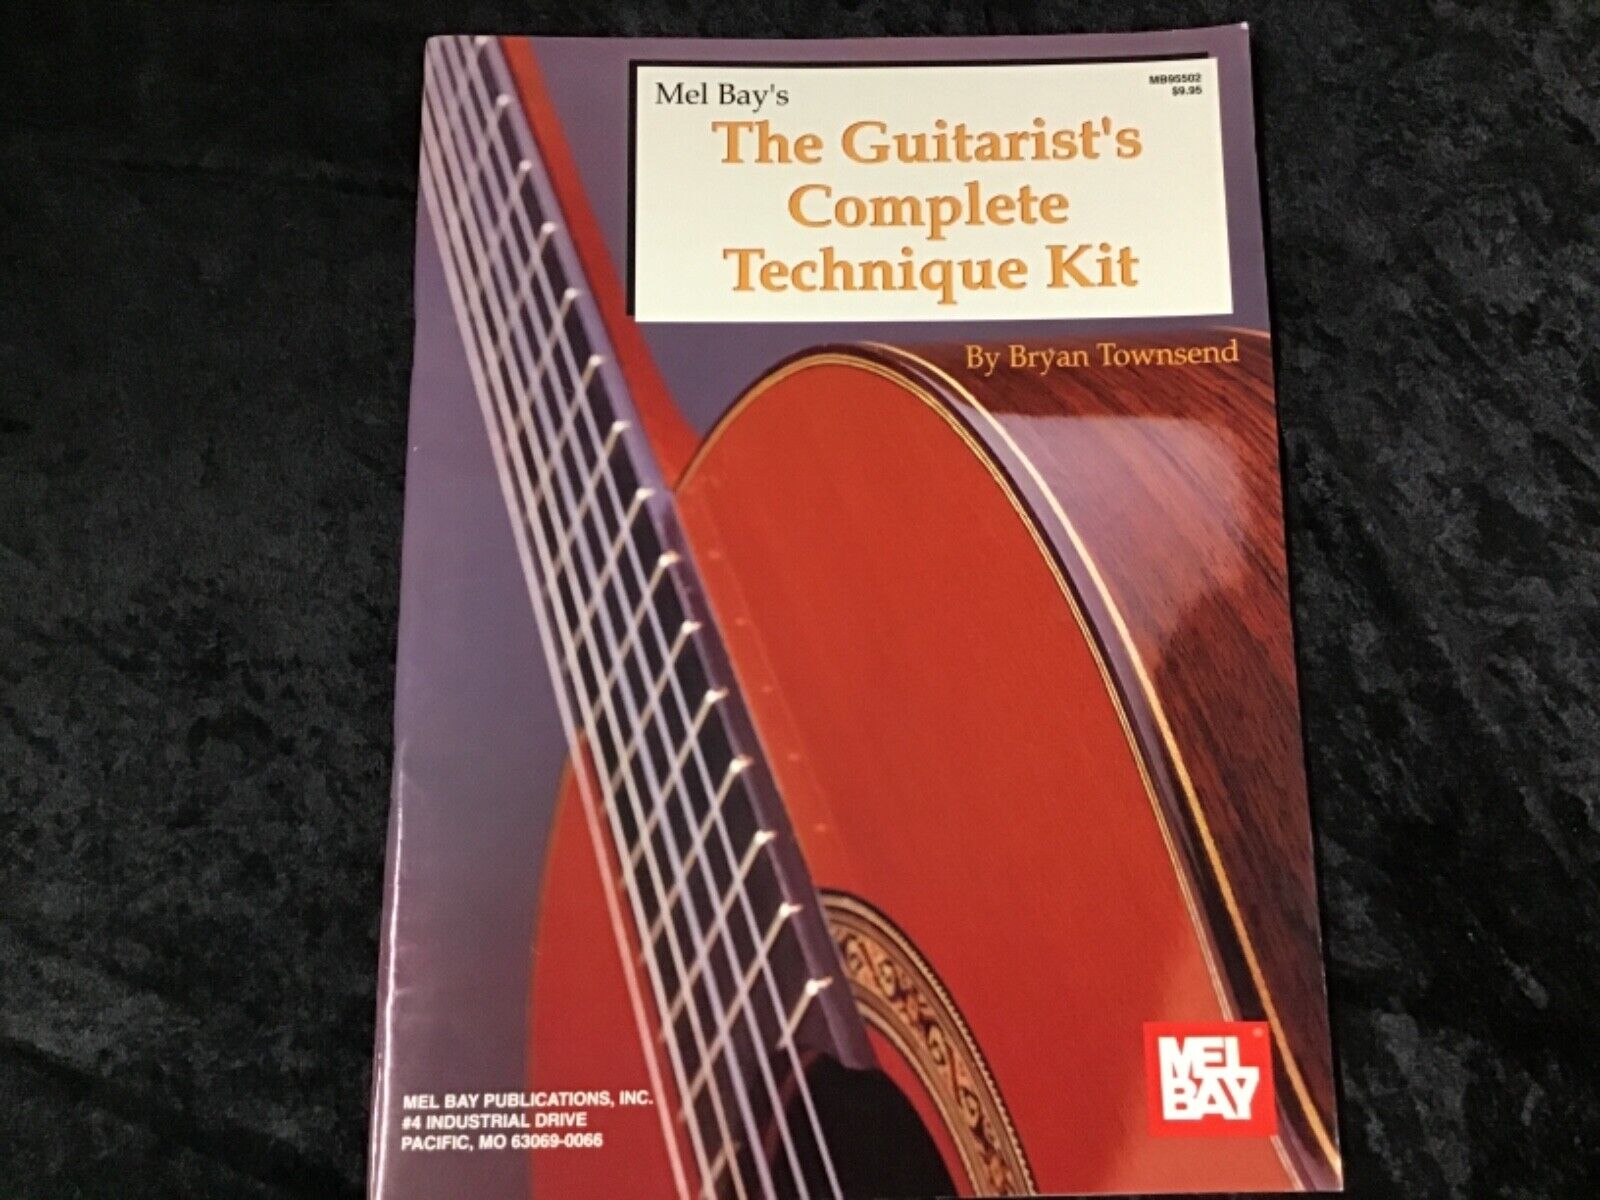 Sheet Music Books - Guitar - Solos, Picking Styles, and Tips - Reduced Prices